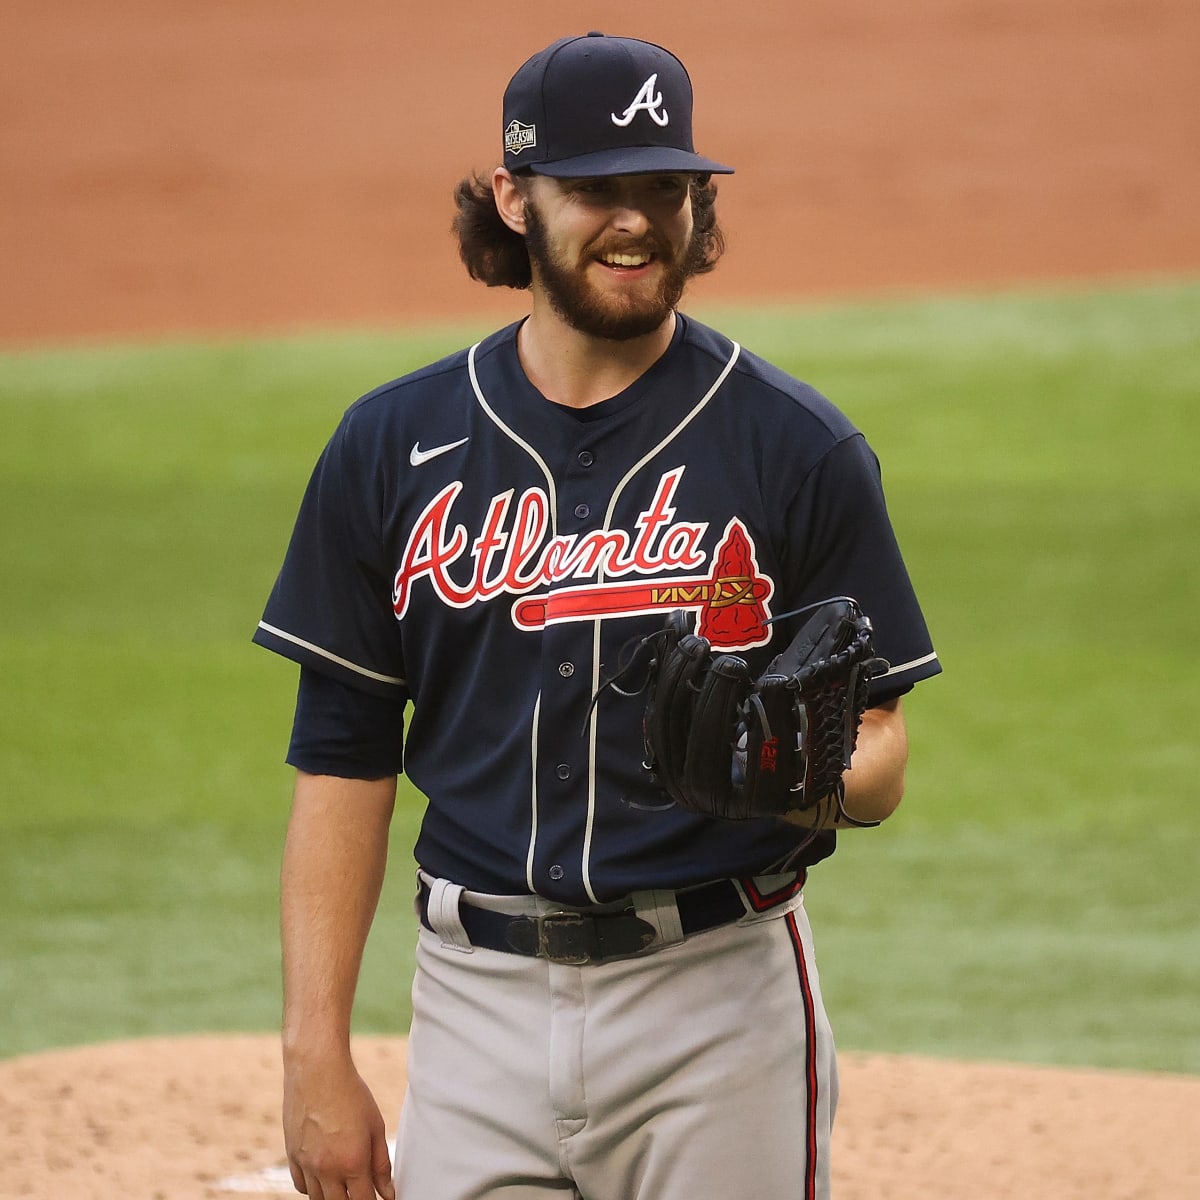 Anderson scheduled to start for Braves at Yankees